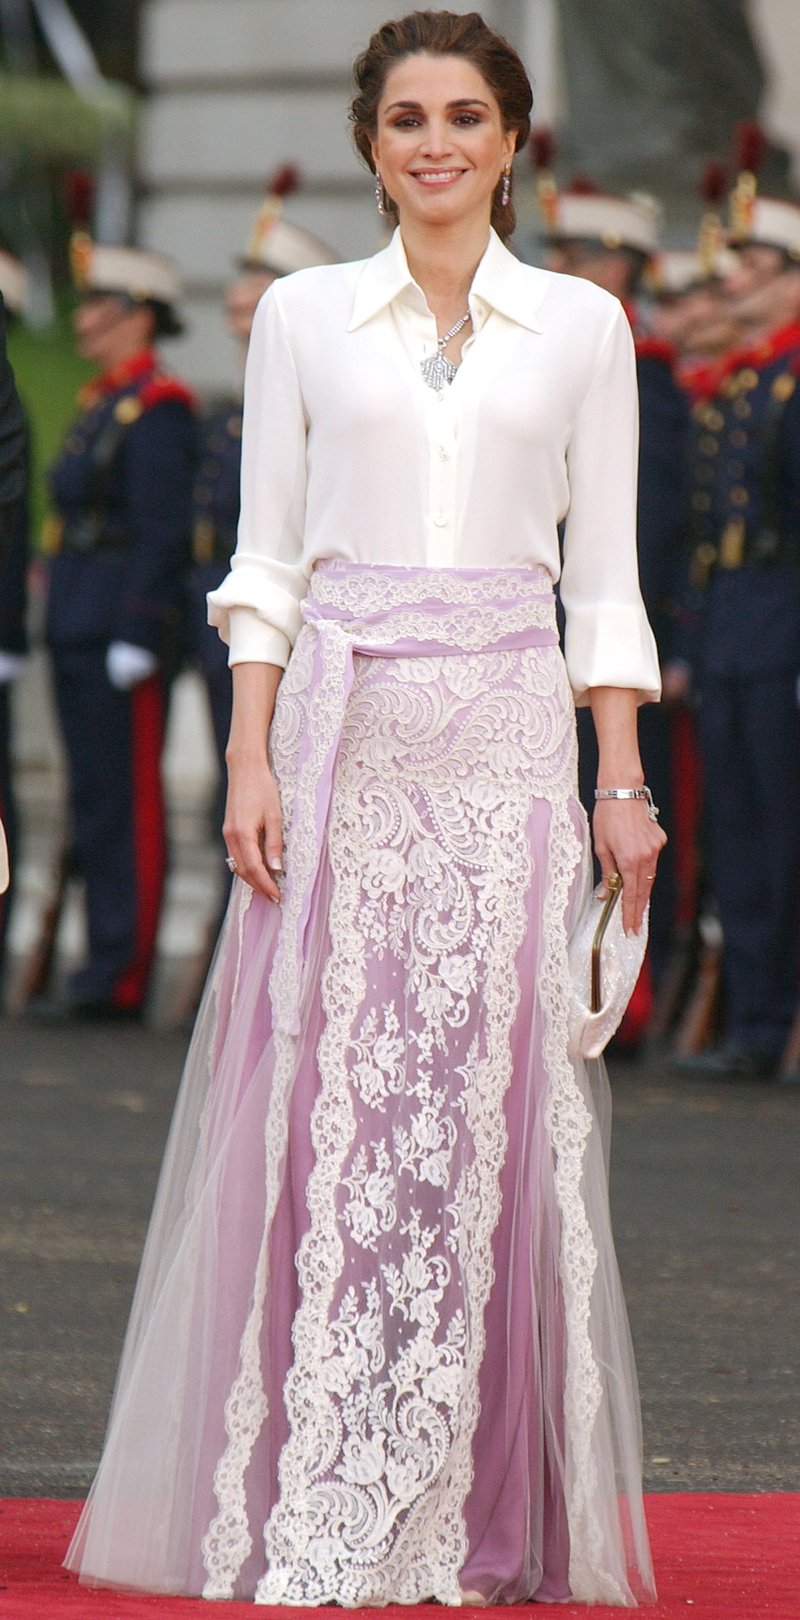 Here Are Times That Hm Queen Rania Of Jordan Stunned In Givenchy